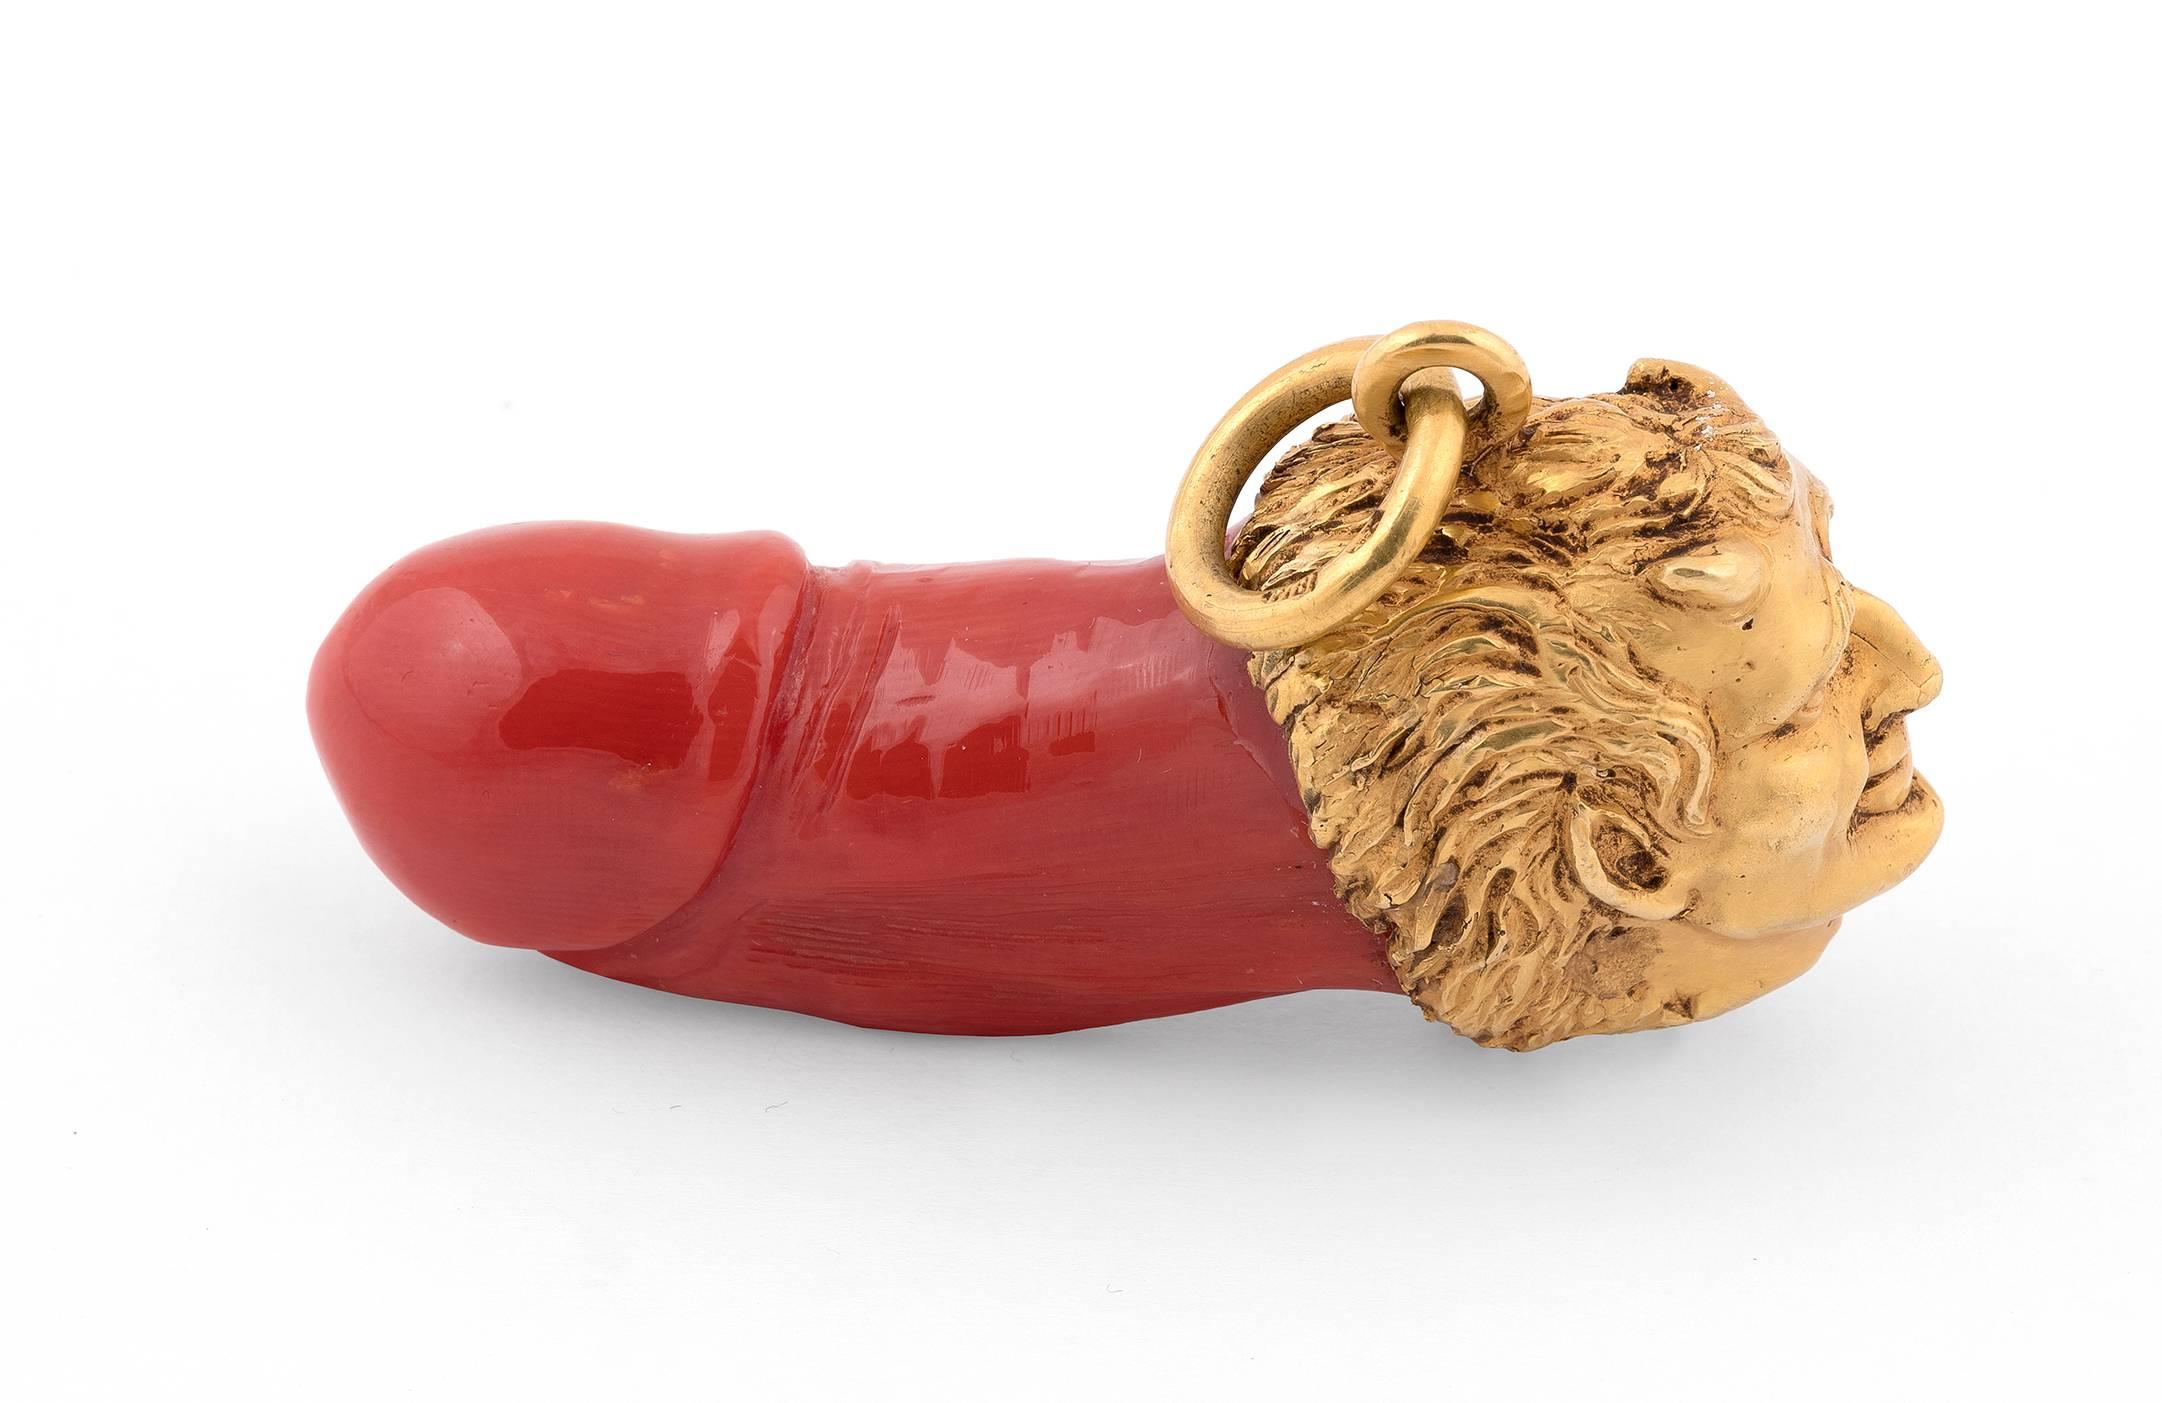 On the top the face of the satyr and coral phallus pendant length 6cm